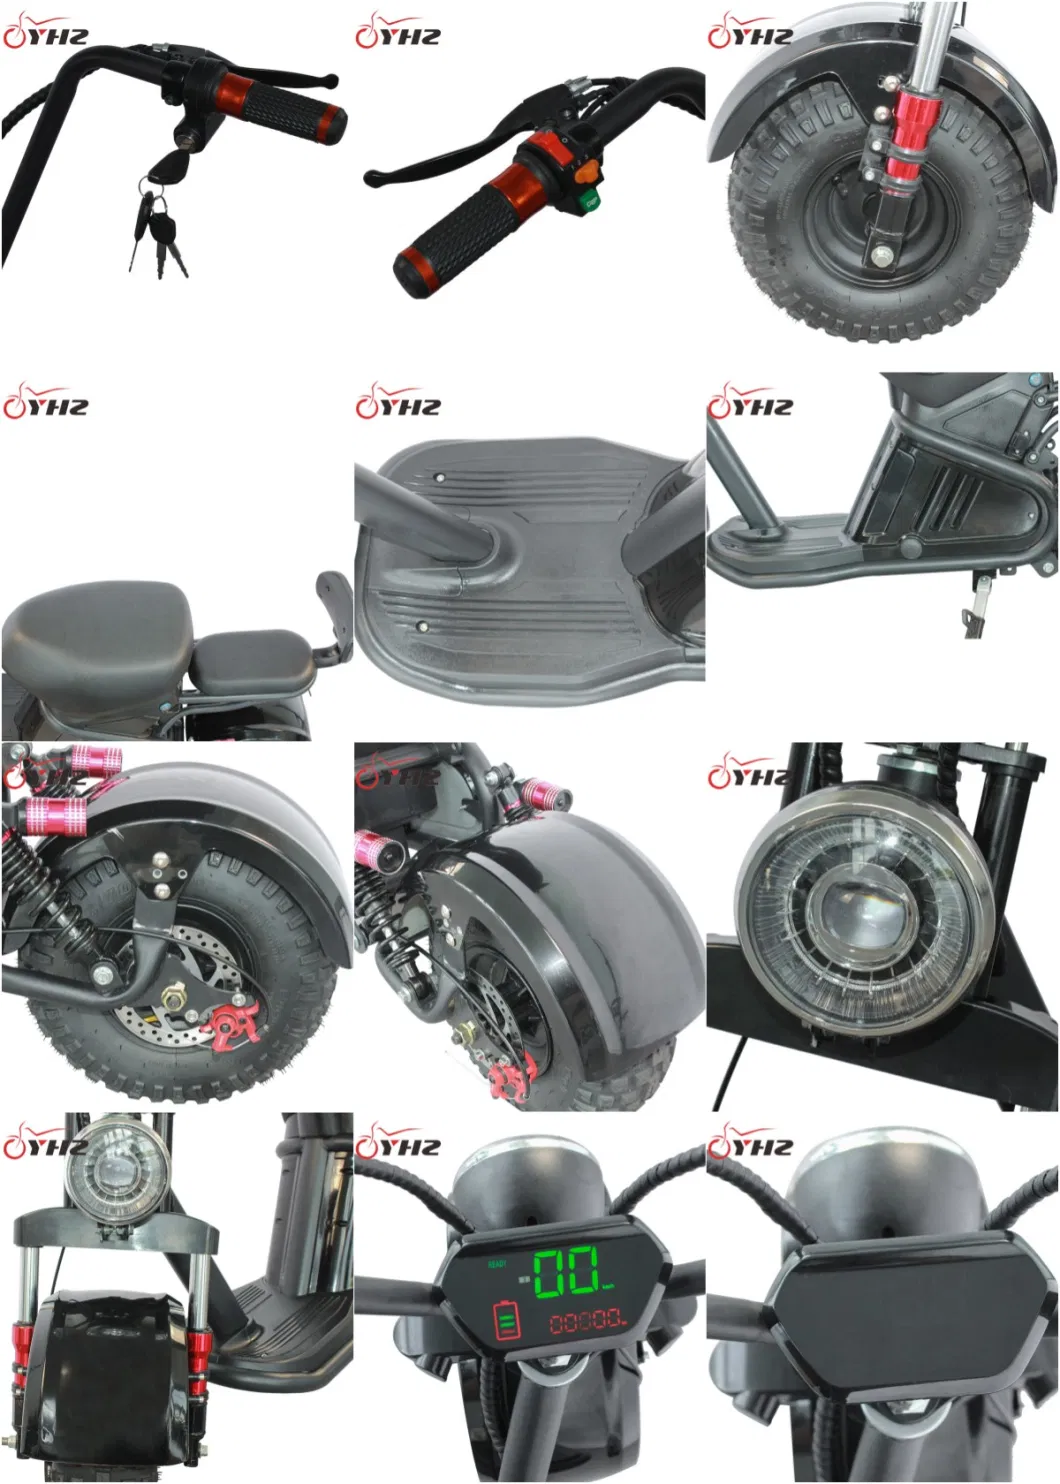 800W Mini Bike Assisted Electric Scooter Motorcycle Motorbike